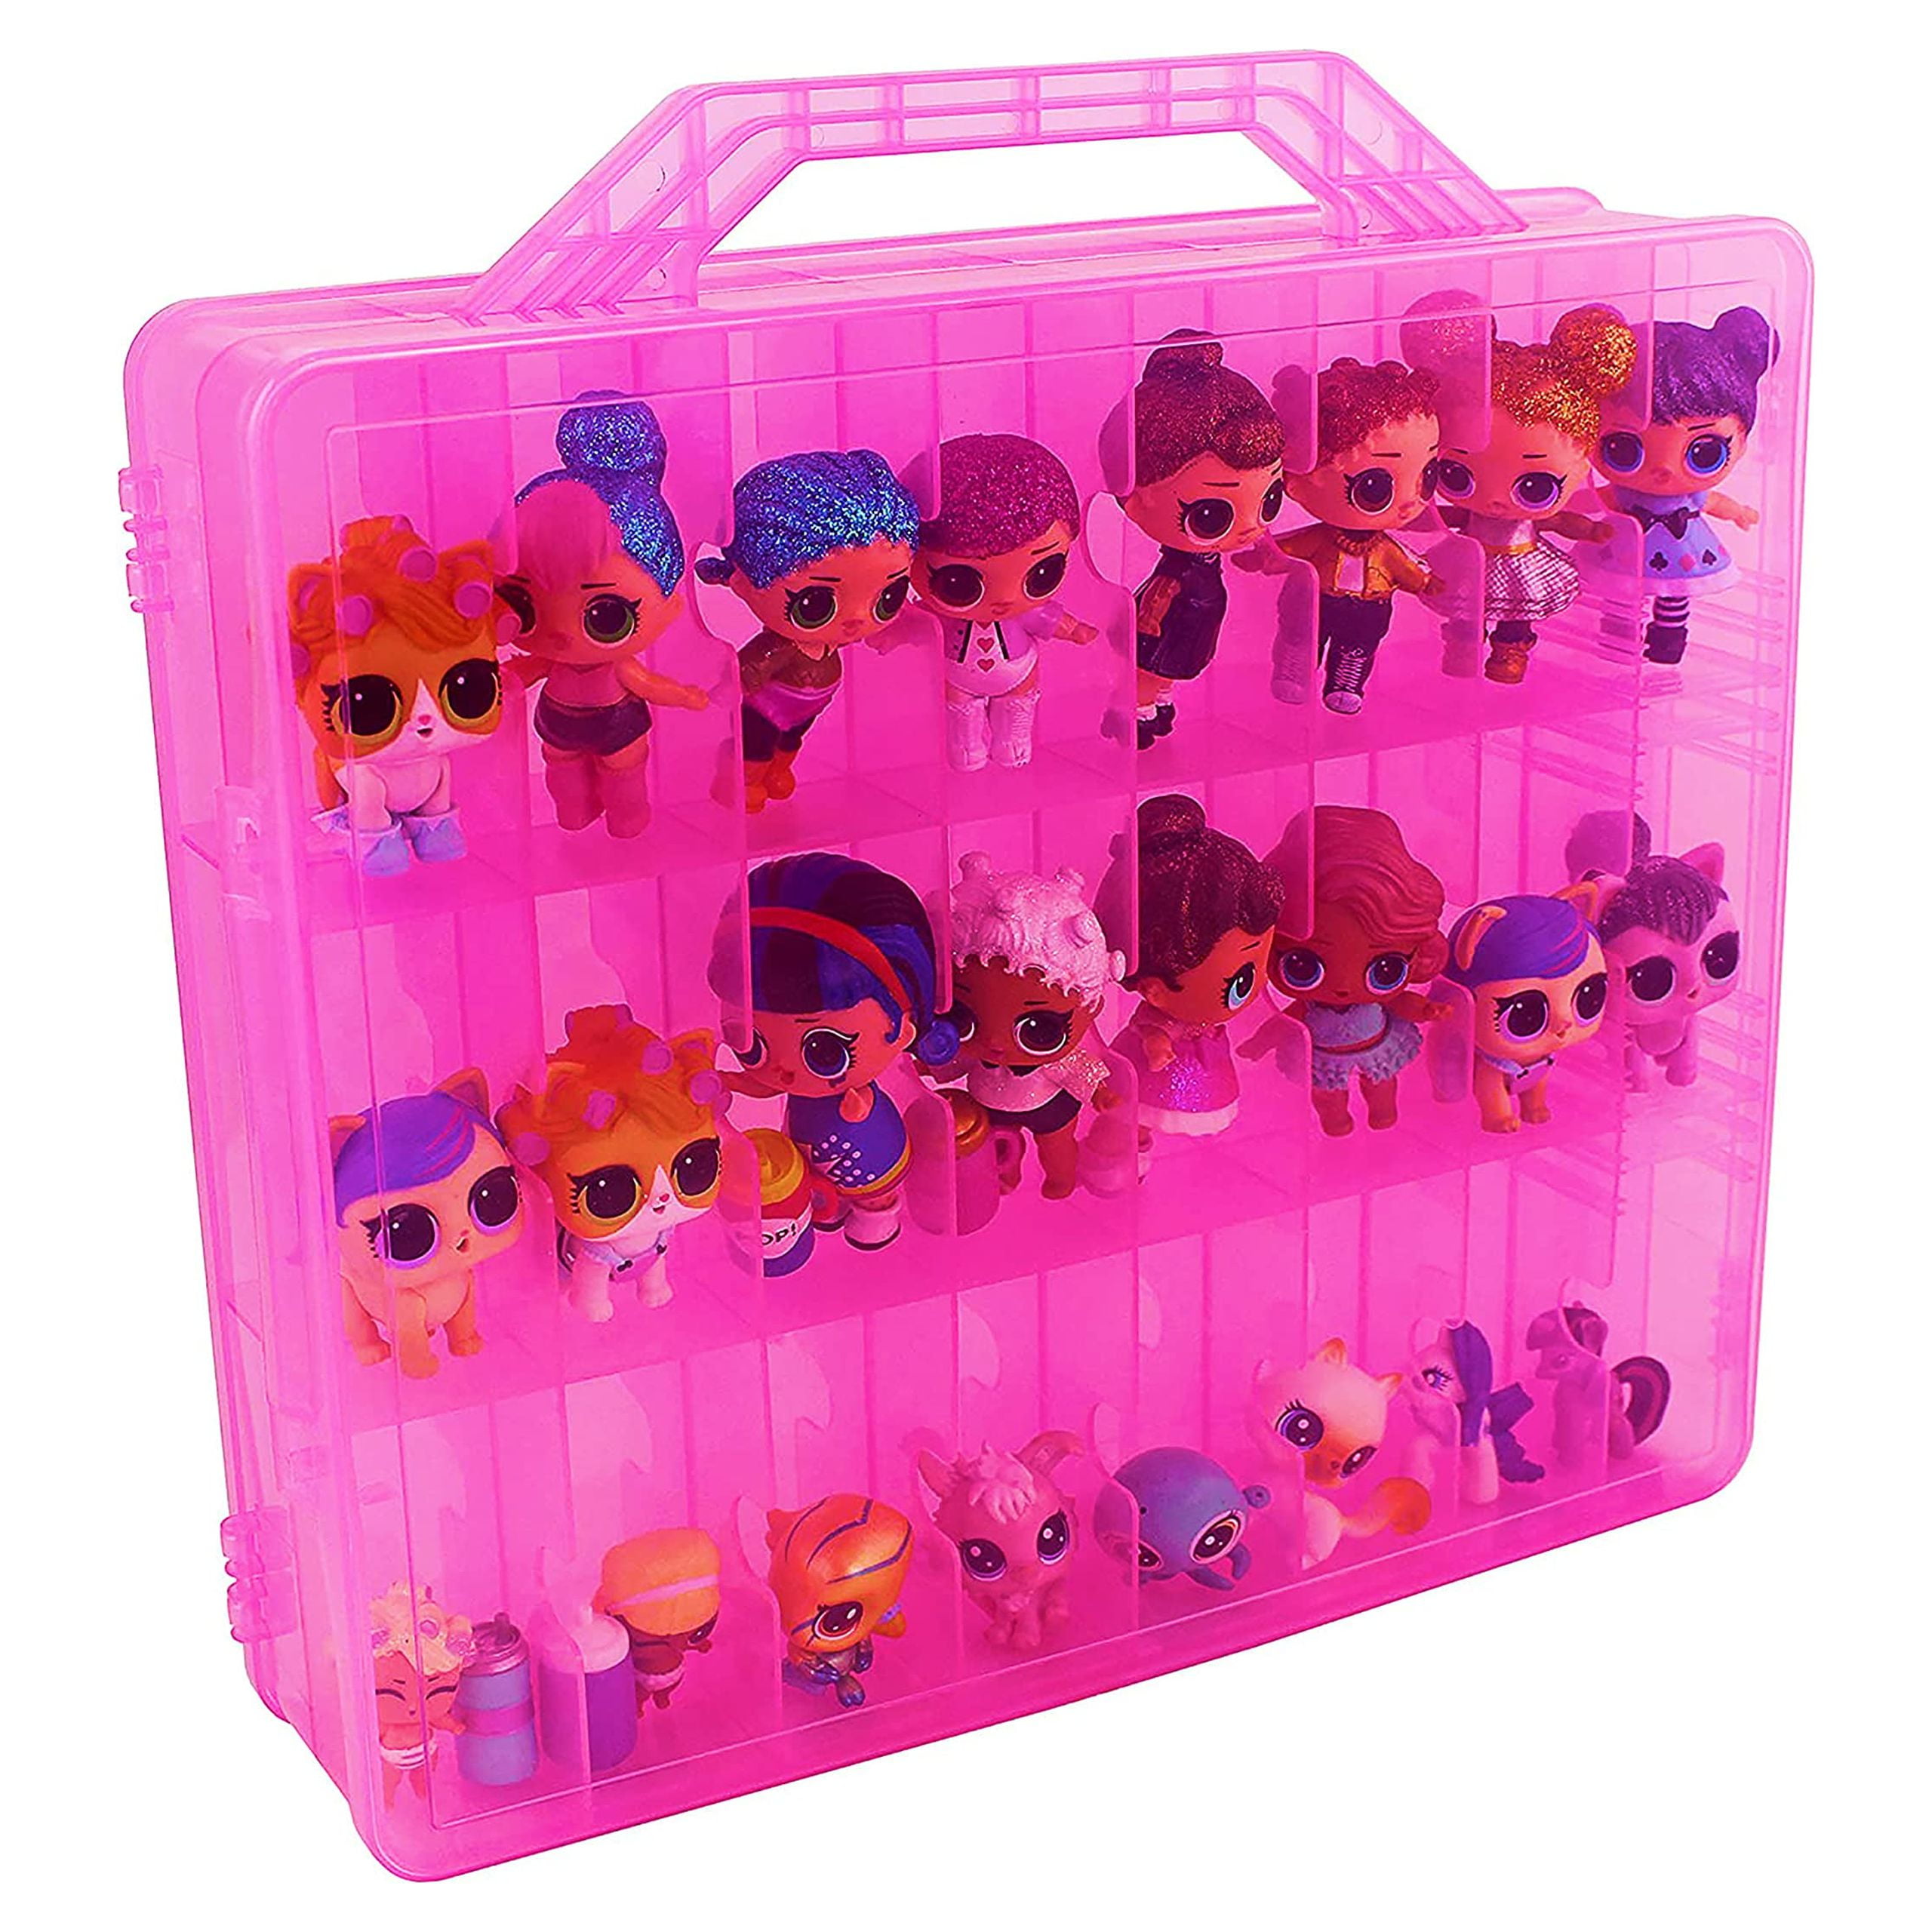 Toy Car Storage Organizer Case Compatible with Hot Wheels/for Matchbox  Cars. Display Carrying Container Holder for LOL Surprise Dolls/for Shopkins